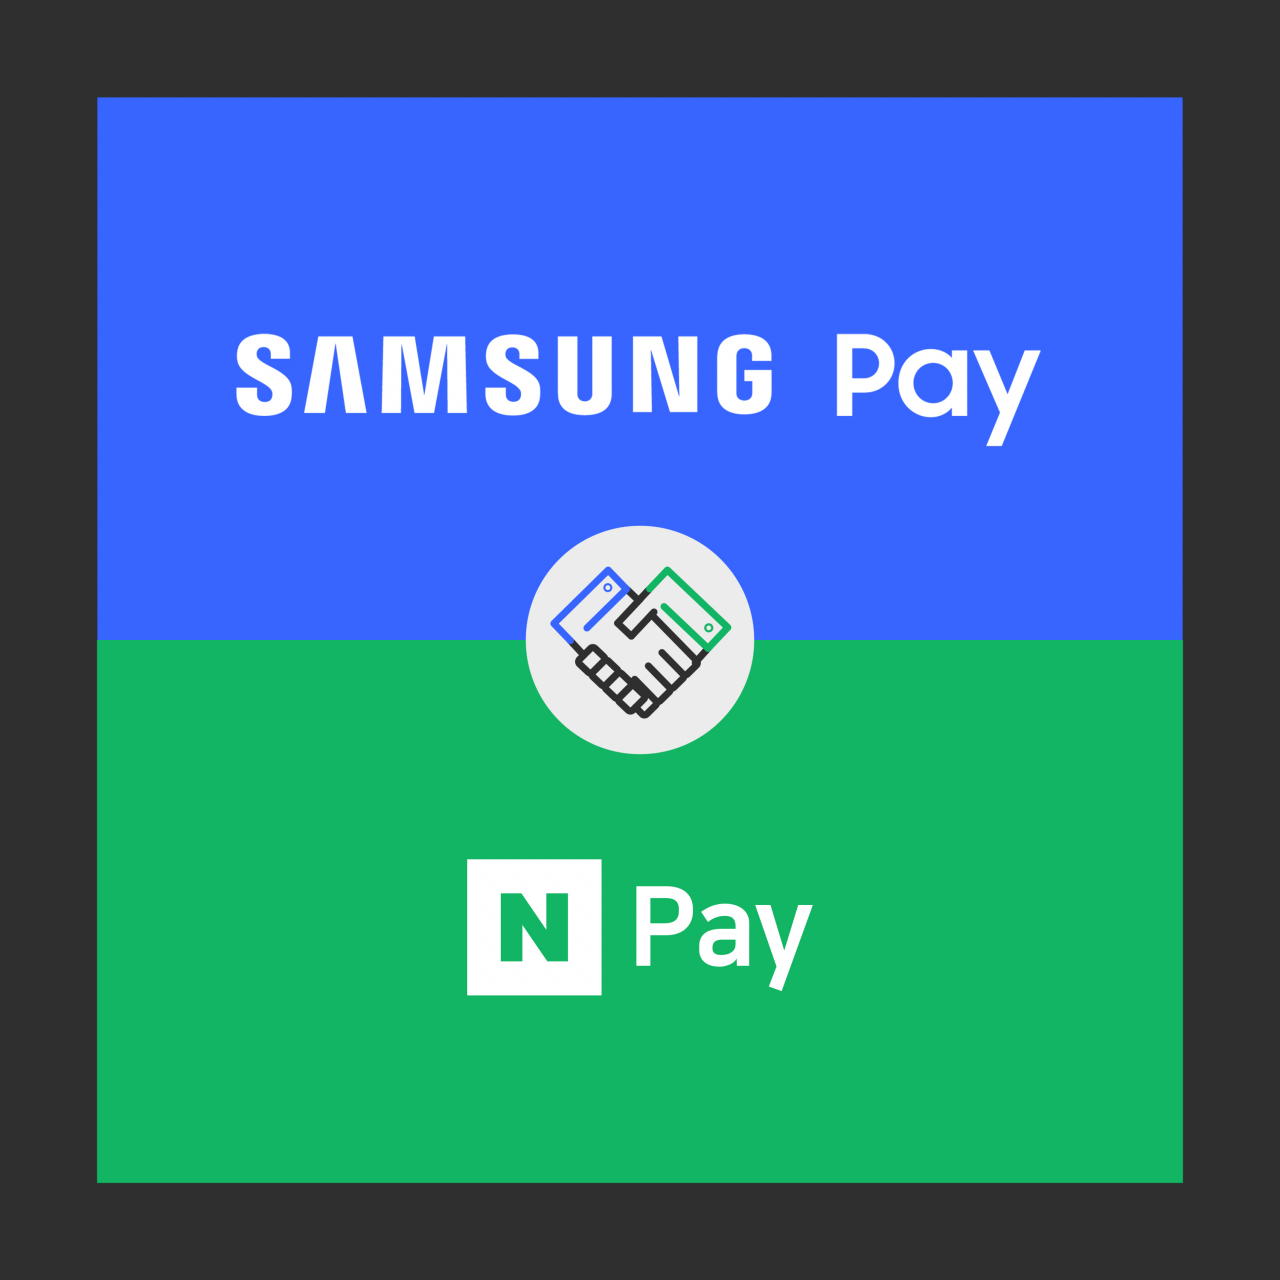 An image of Samsung Pay's partnership with Naver Pay (Samsung Electronics)